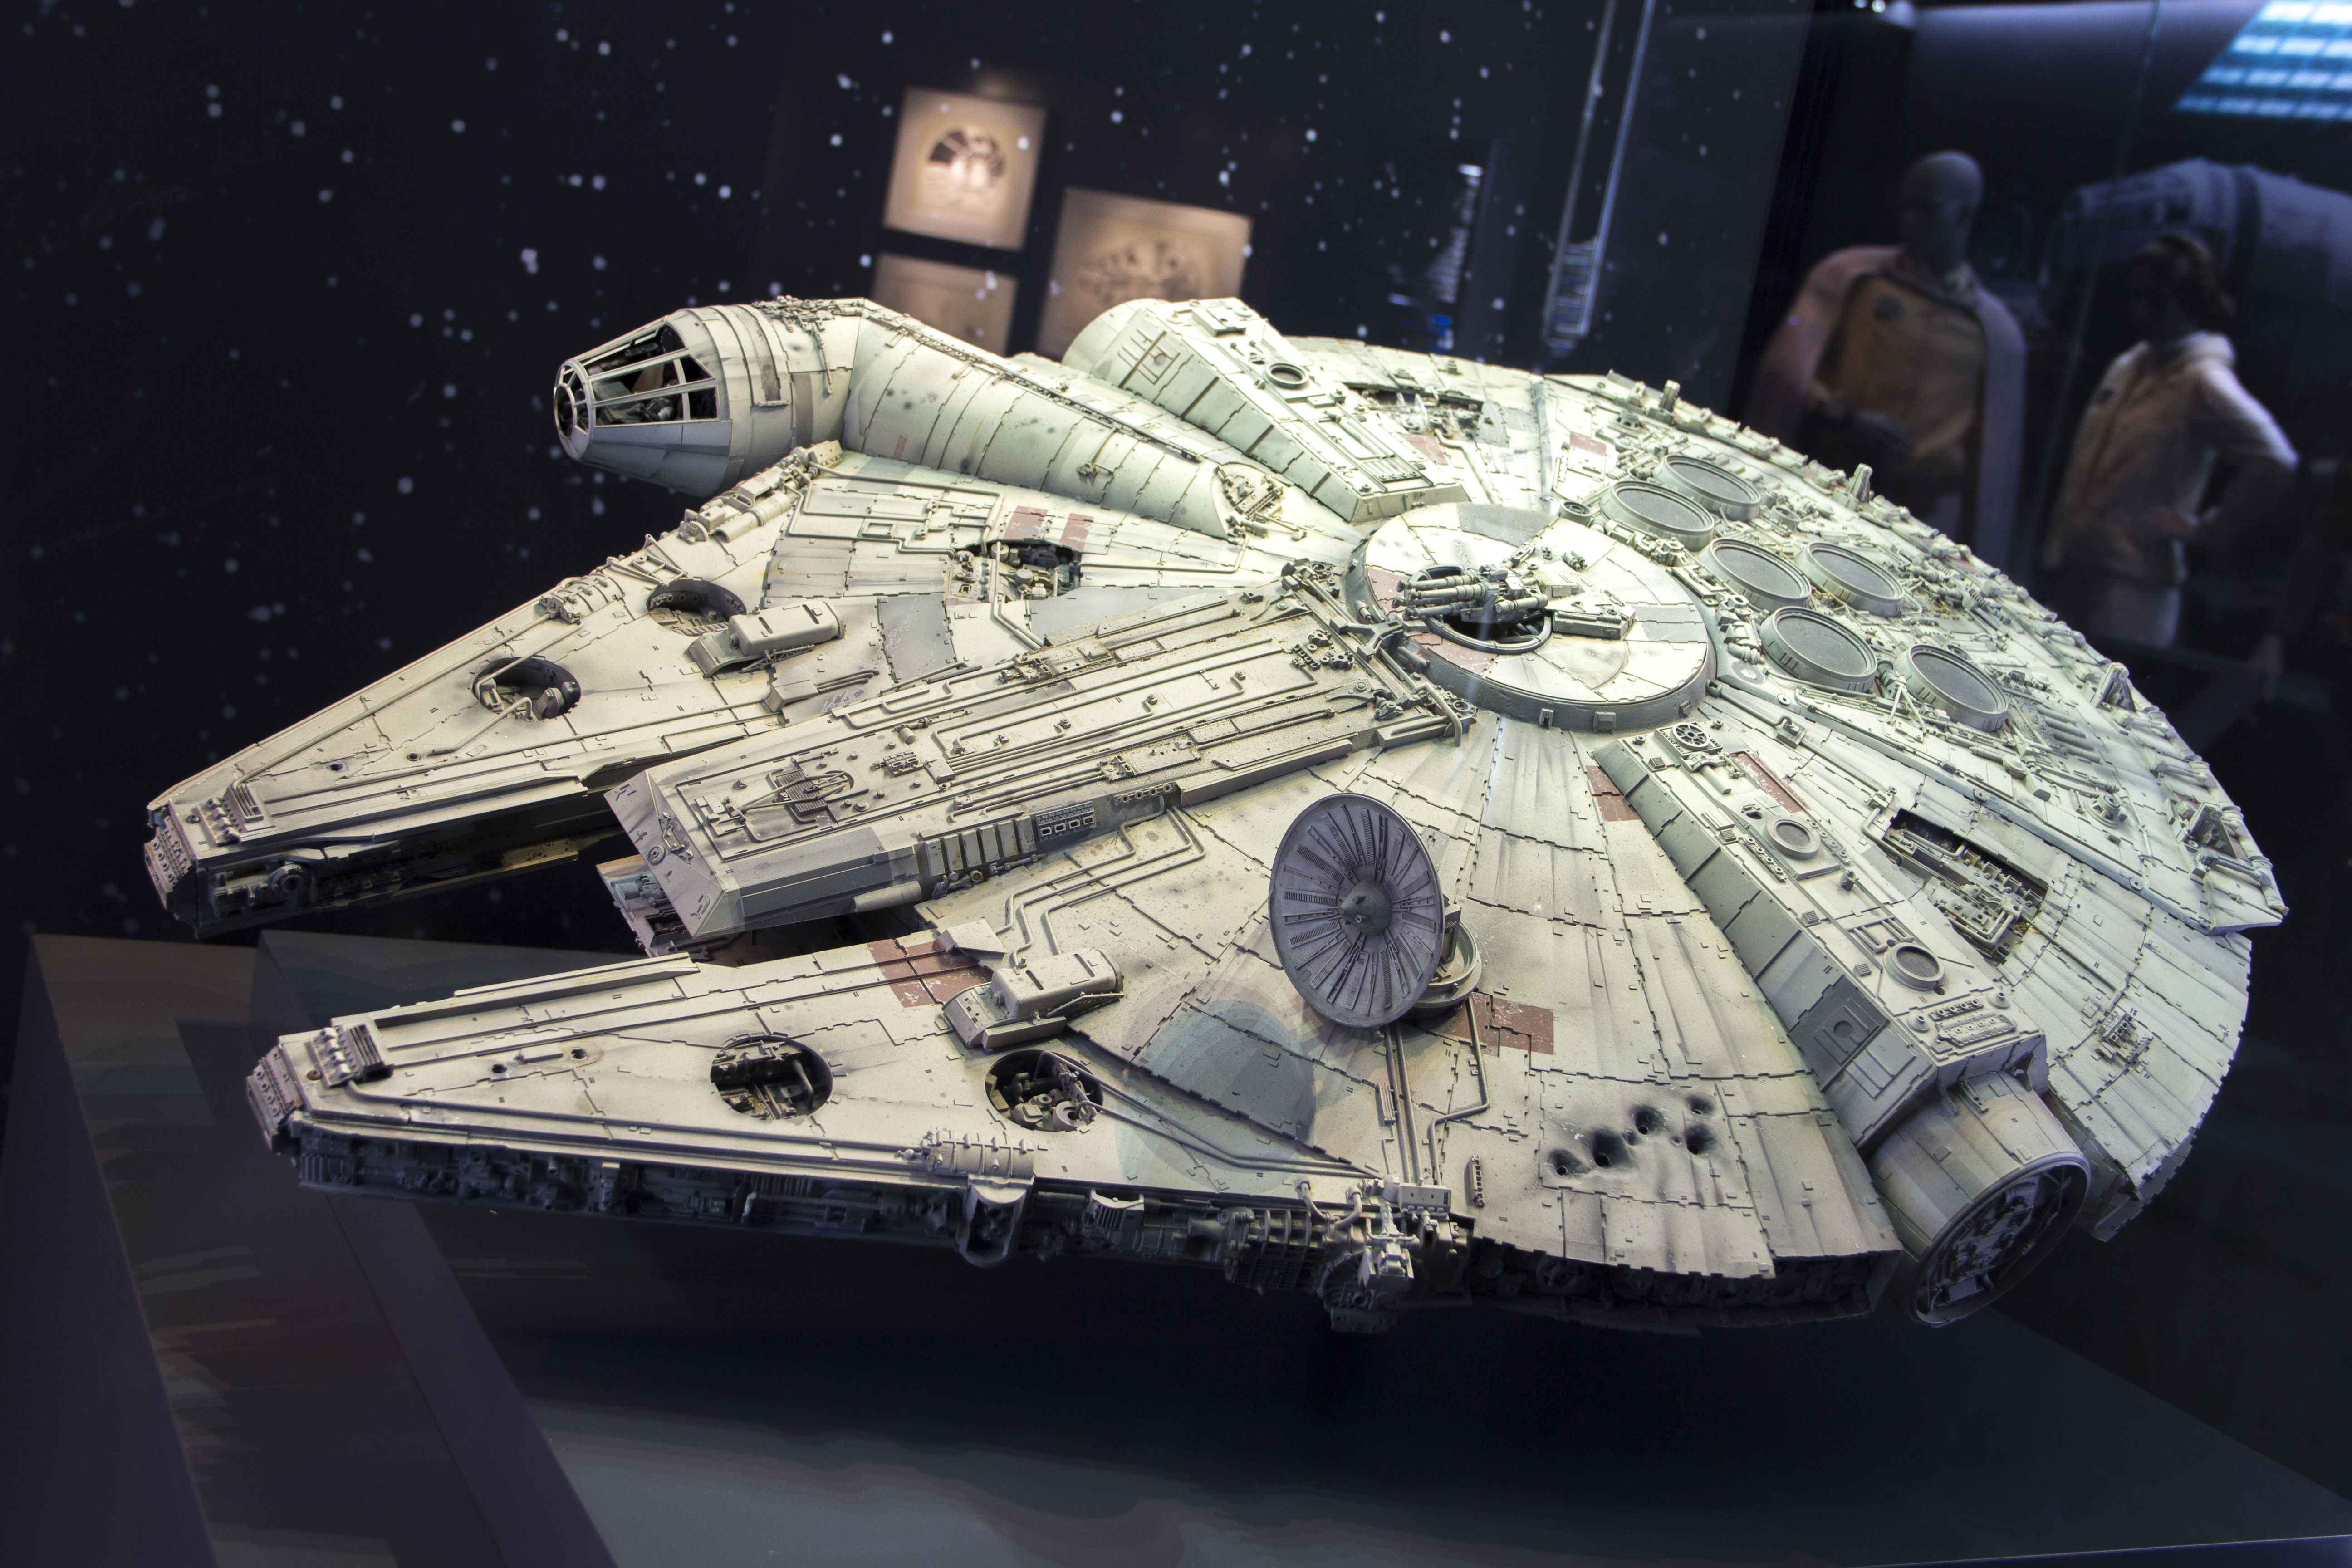 The real Millennium Falcon model used in Star Wars.